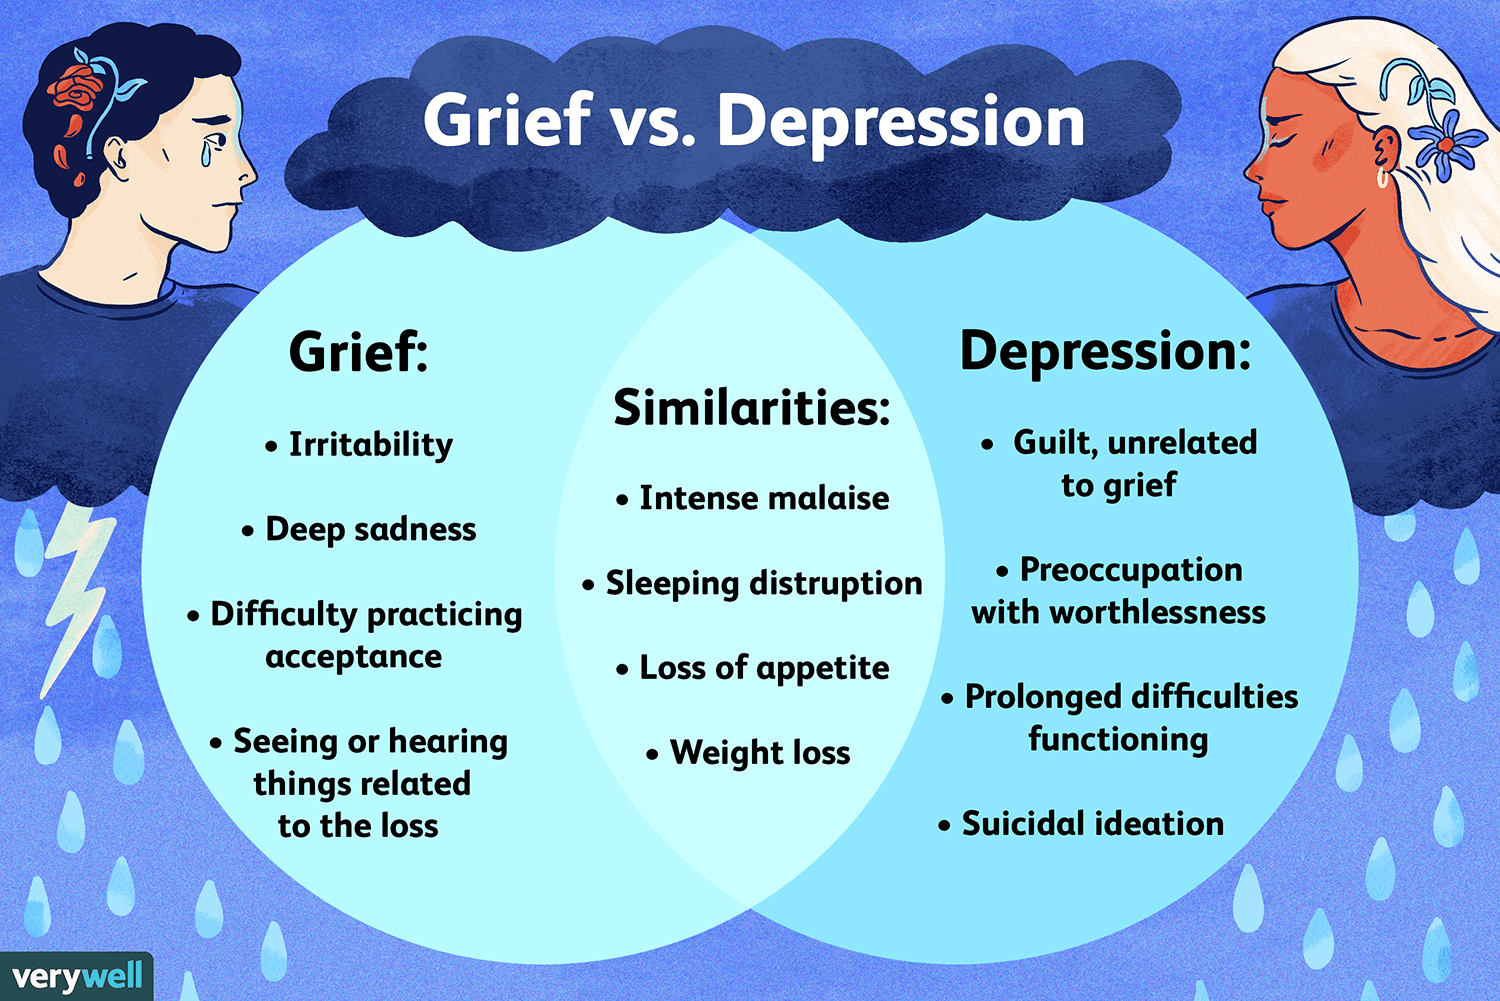 Grief And Depression 1067237 Final Withlogo Revised F3b25faac3b9428c989ab9f2a216d9ed 